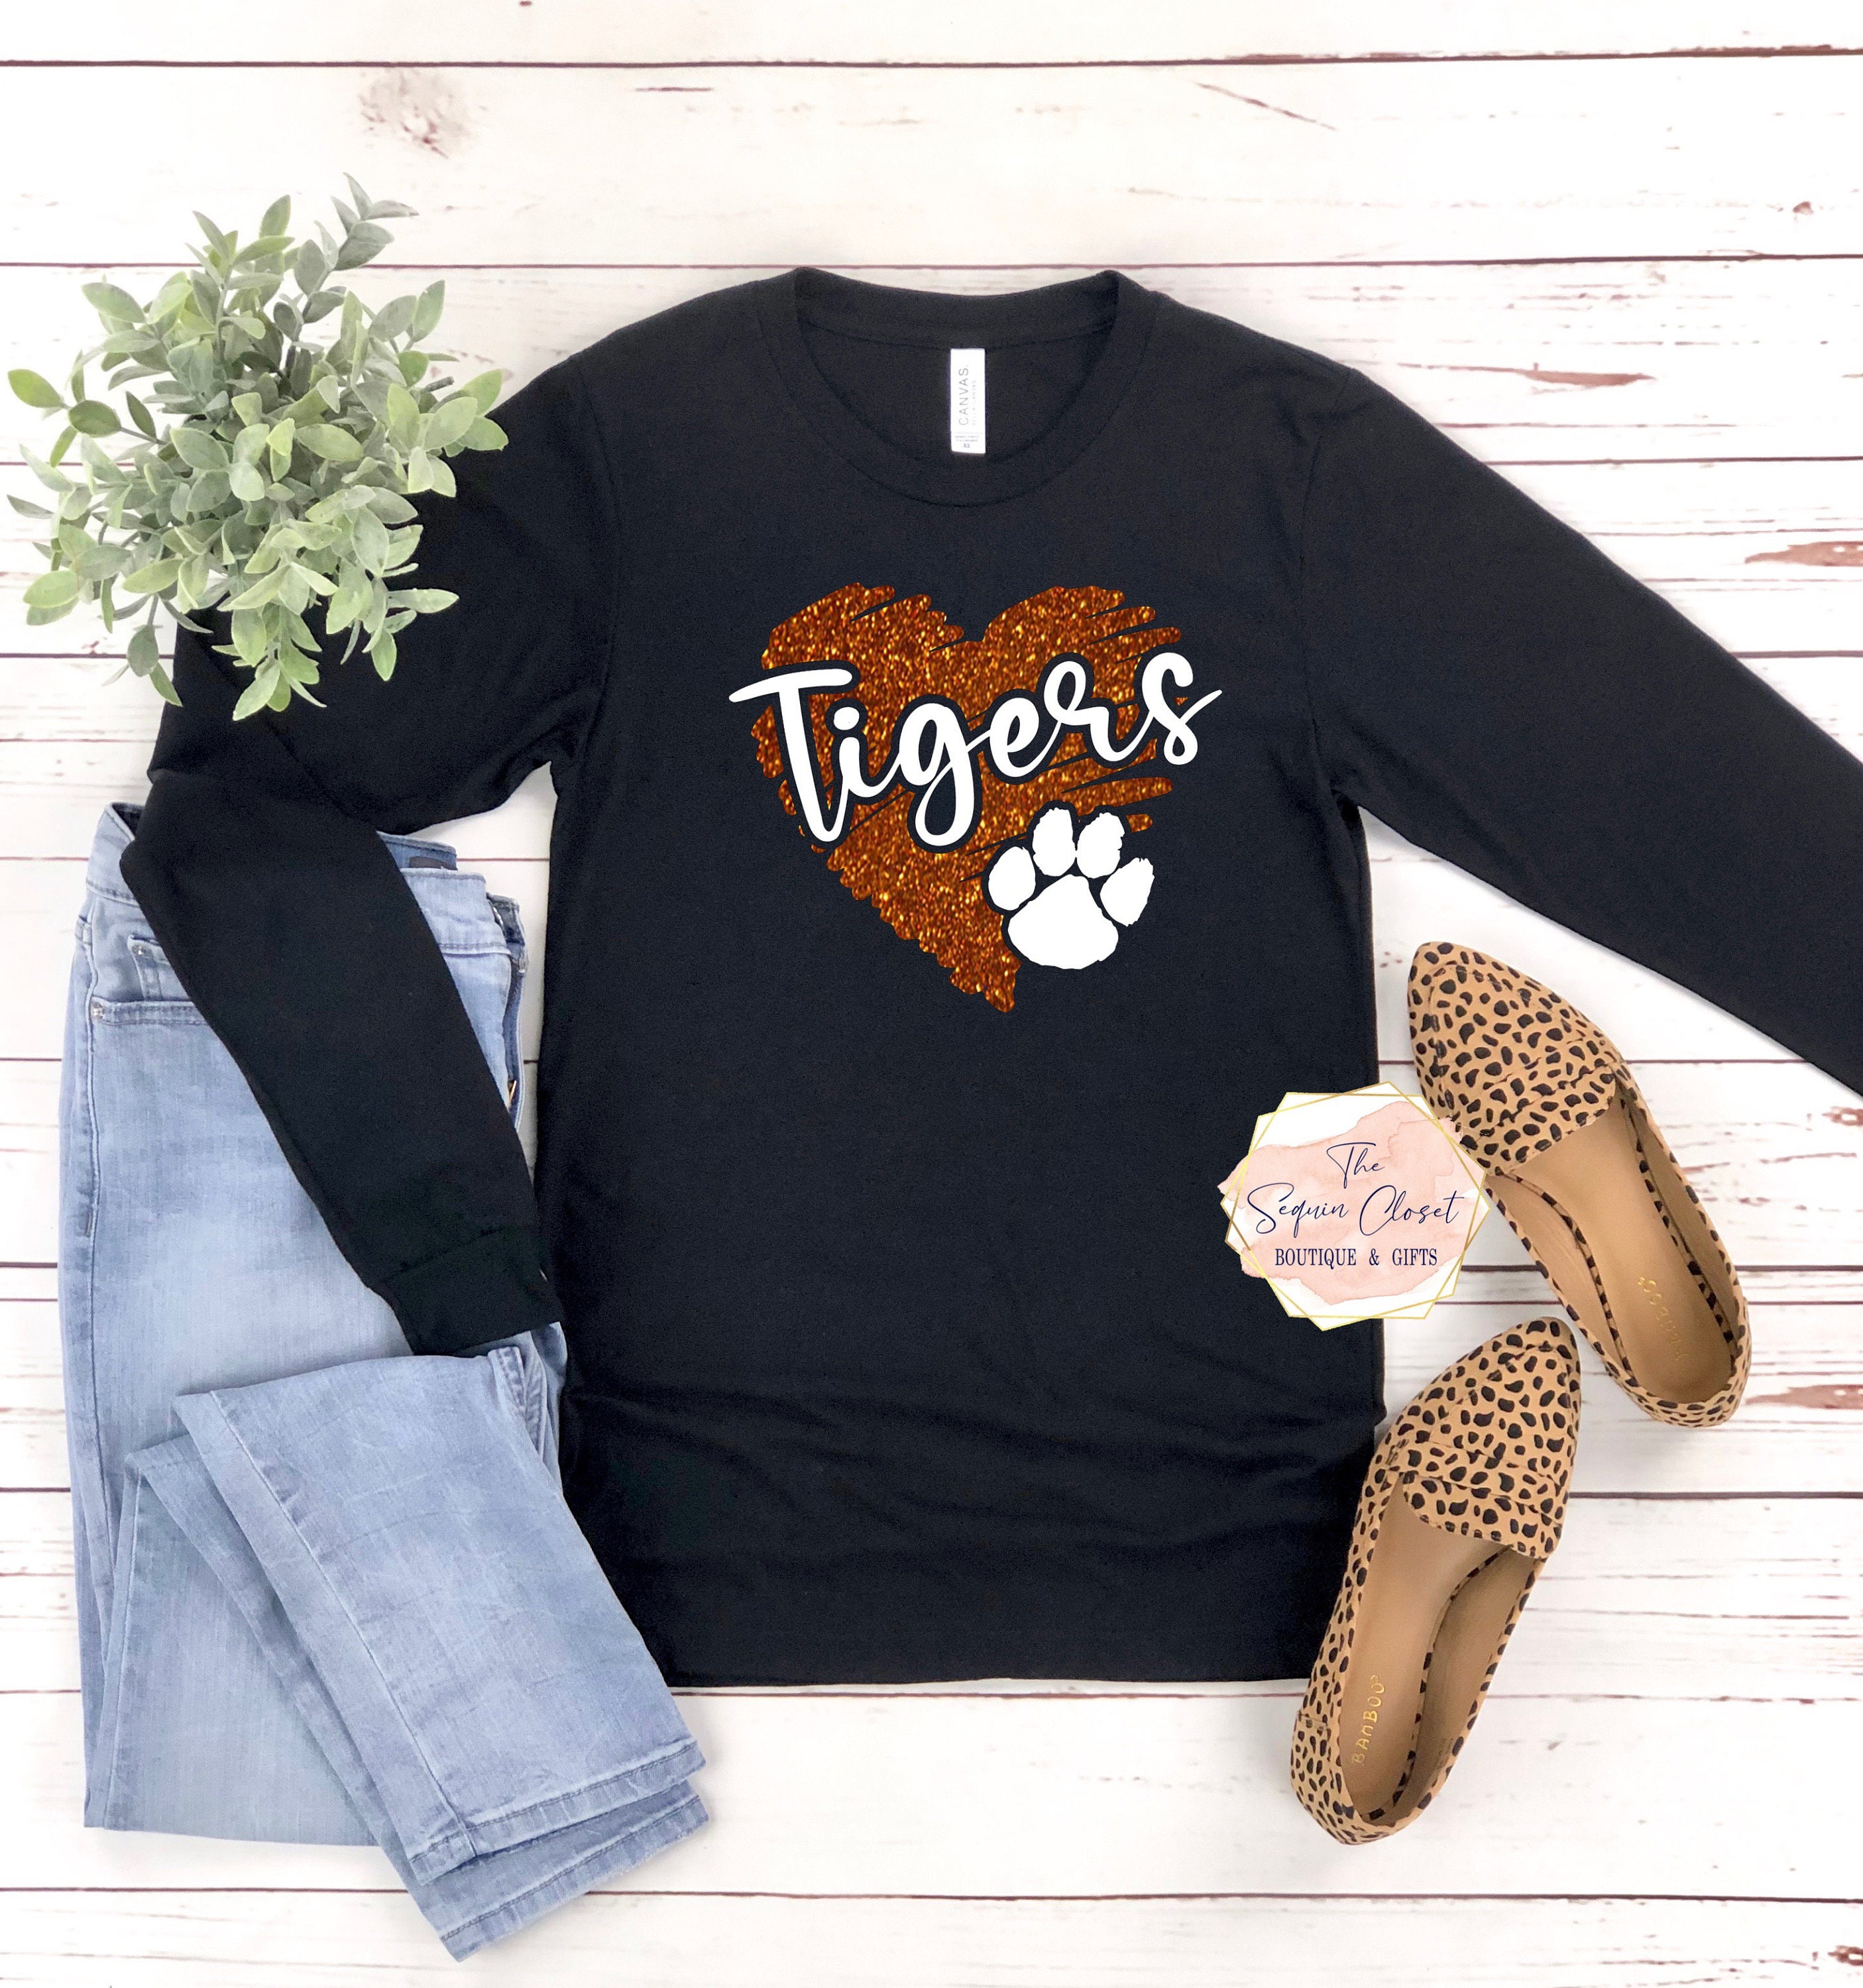  Made in USA - | Tiger Face 3D T-Shirt - Womens Top - High Low  Cut Rhinstone Tee : Clothing, Shoes & Jewelry